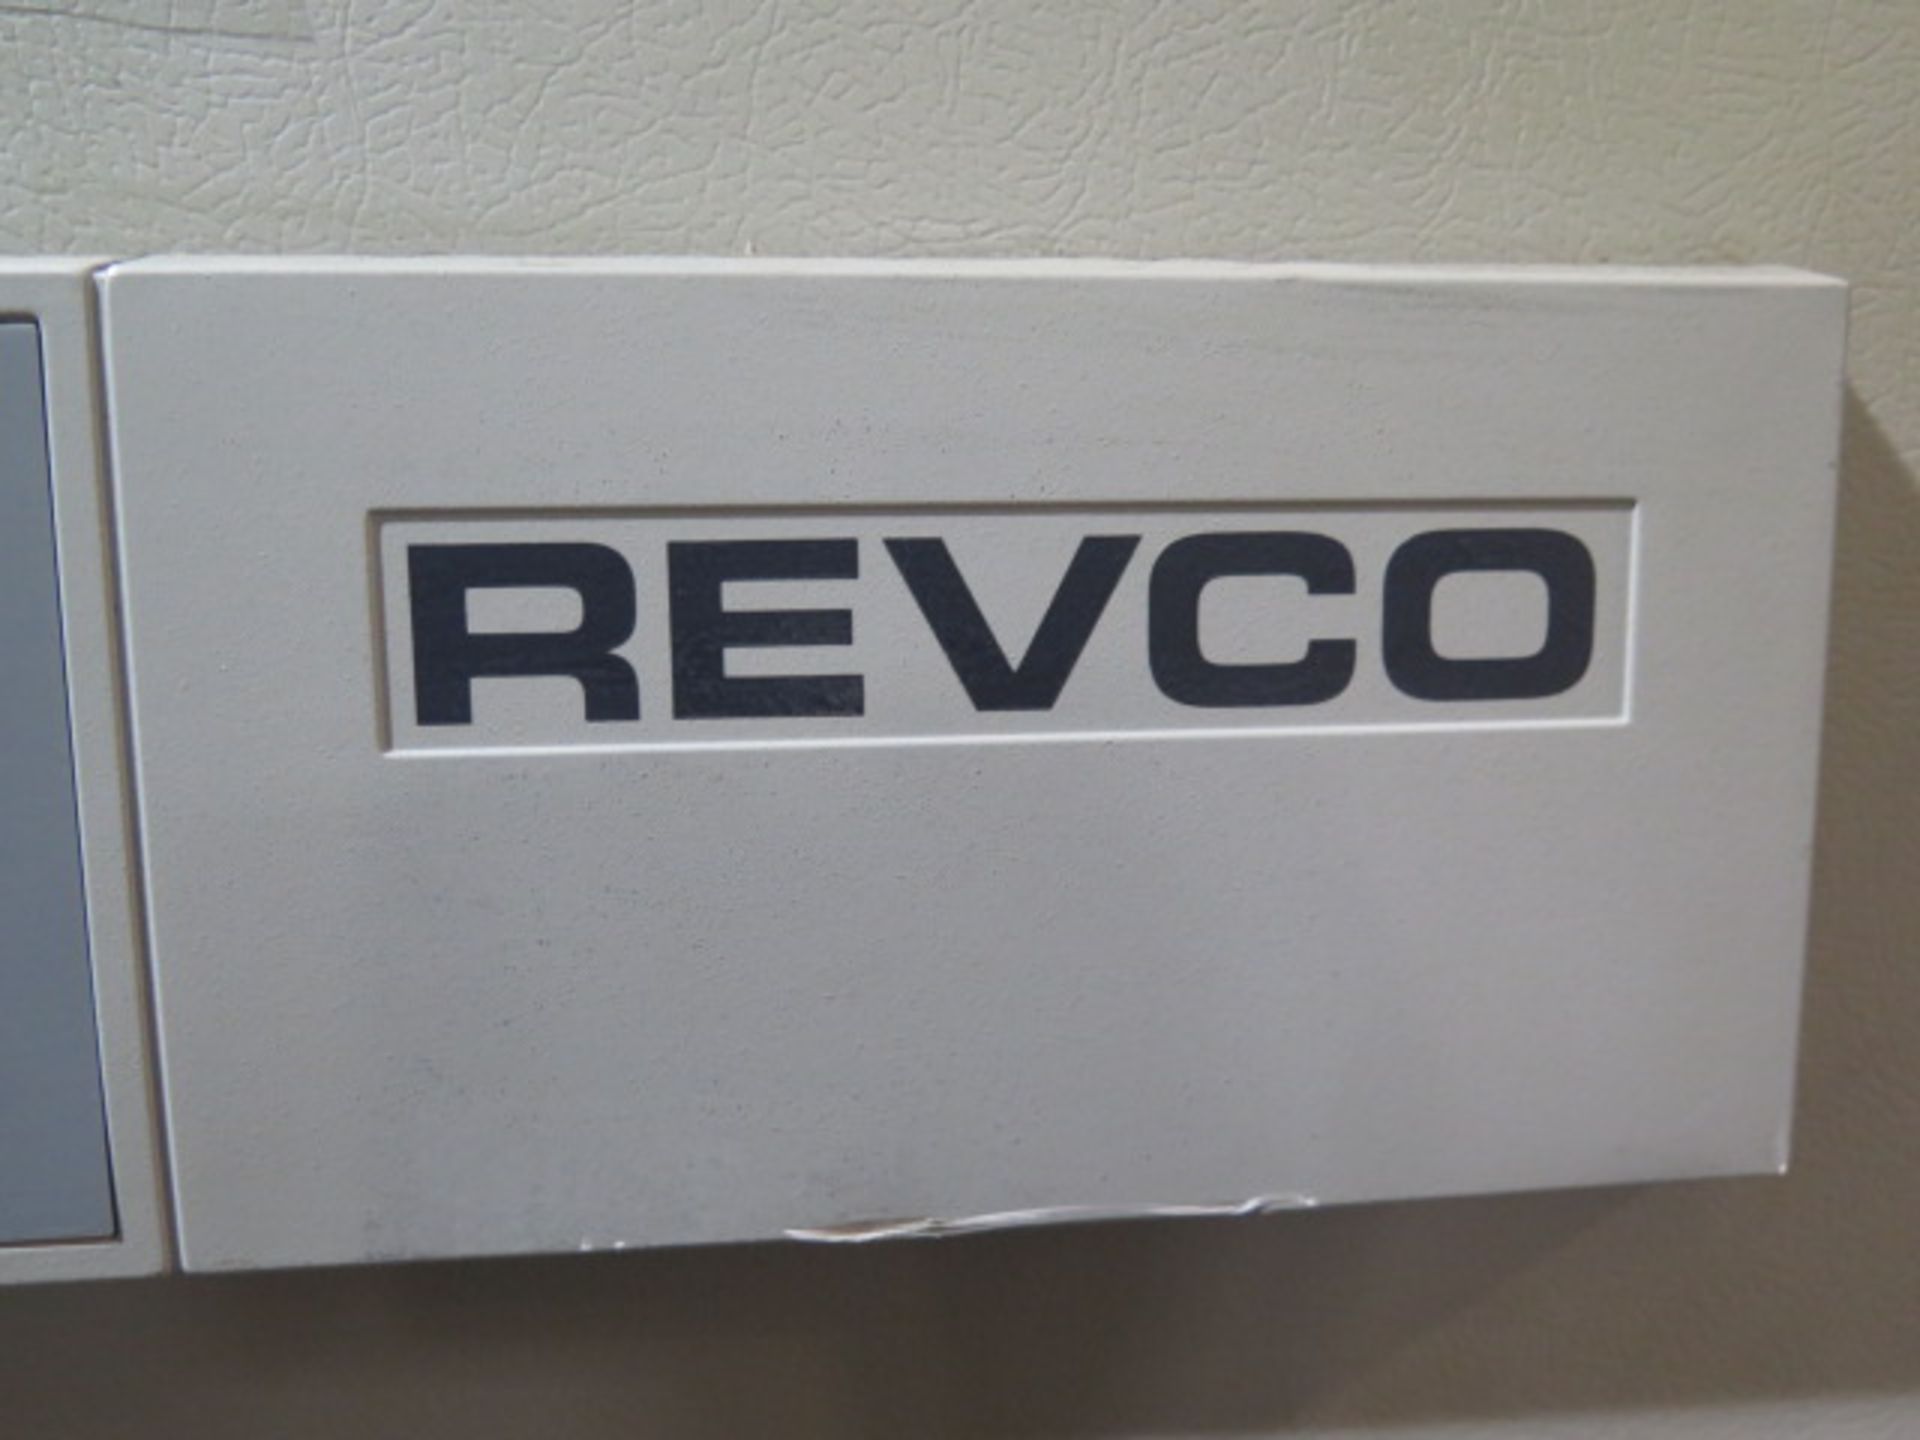 Revco ULT2586-9-A34 -80 Degree Lab Freezer (SOLD AS-IS - NO WARRANTY) - Image 7 of 8